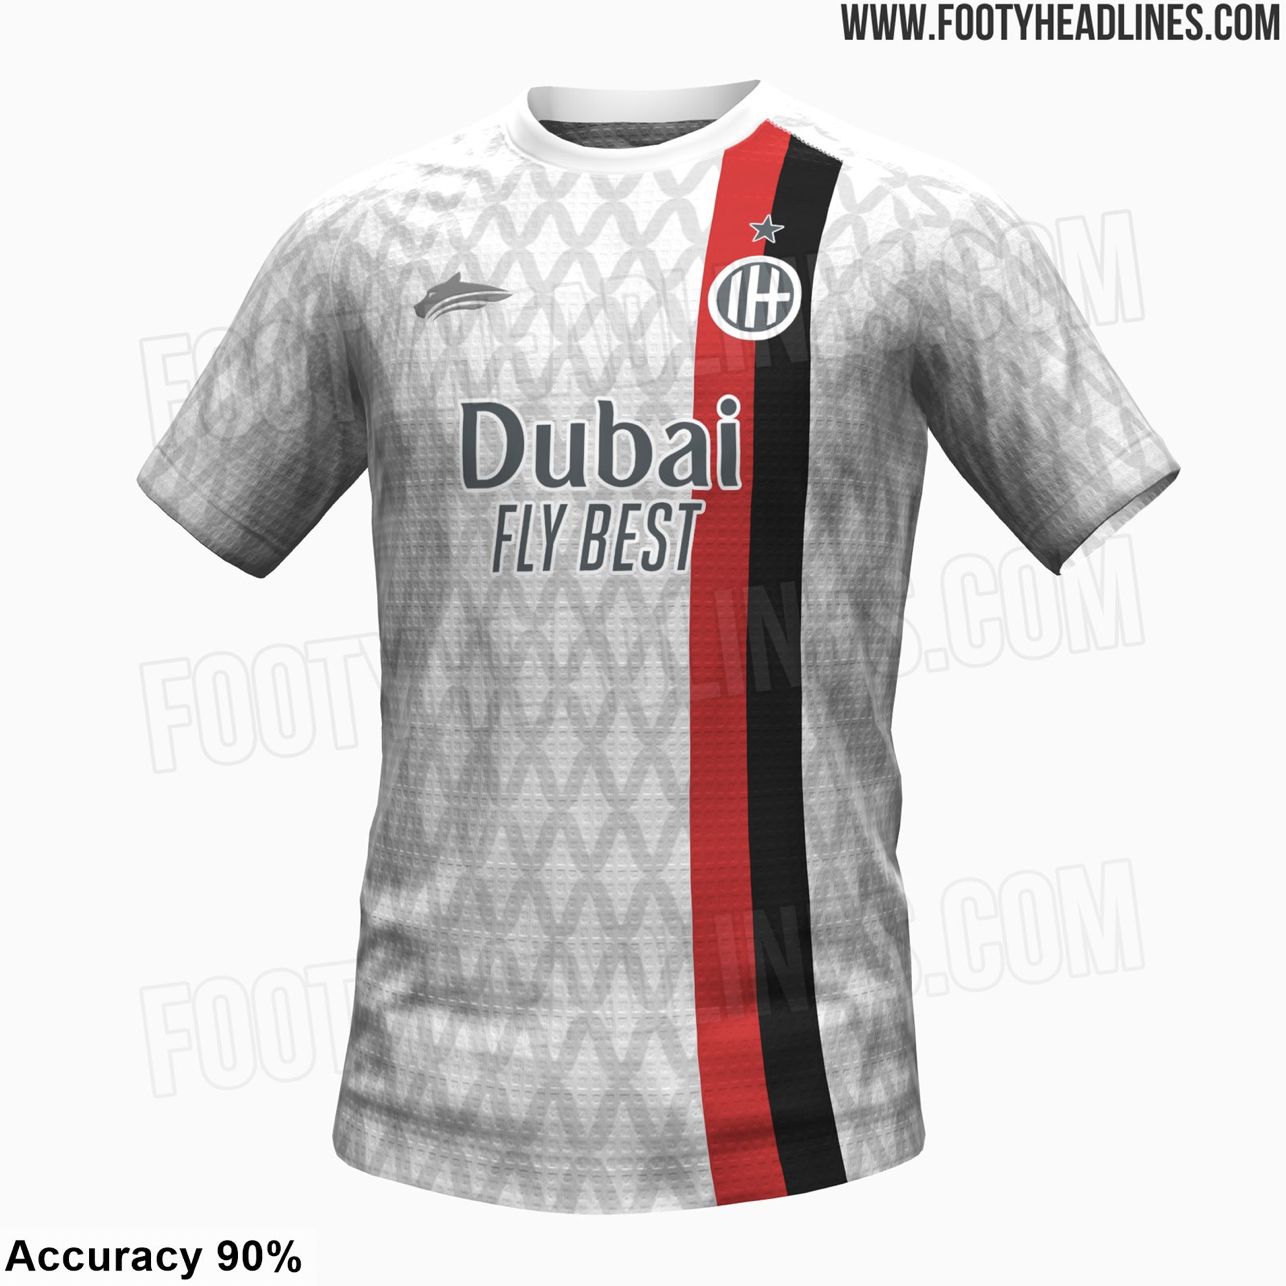 Footy Headlines: Milan's 2023-24 away shirt to be Gucci-inspired -